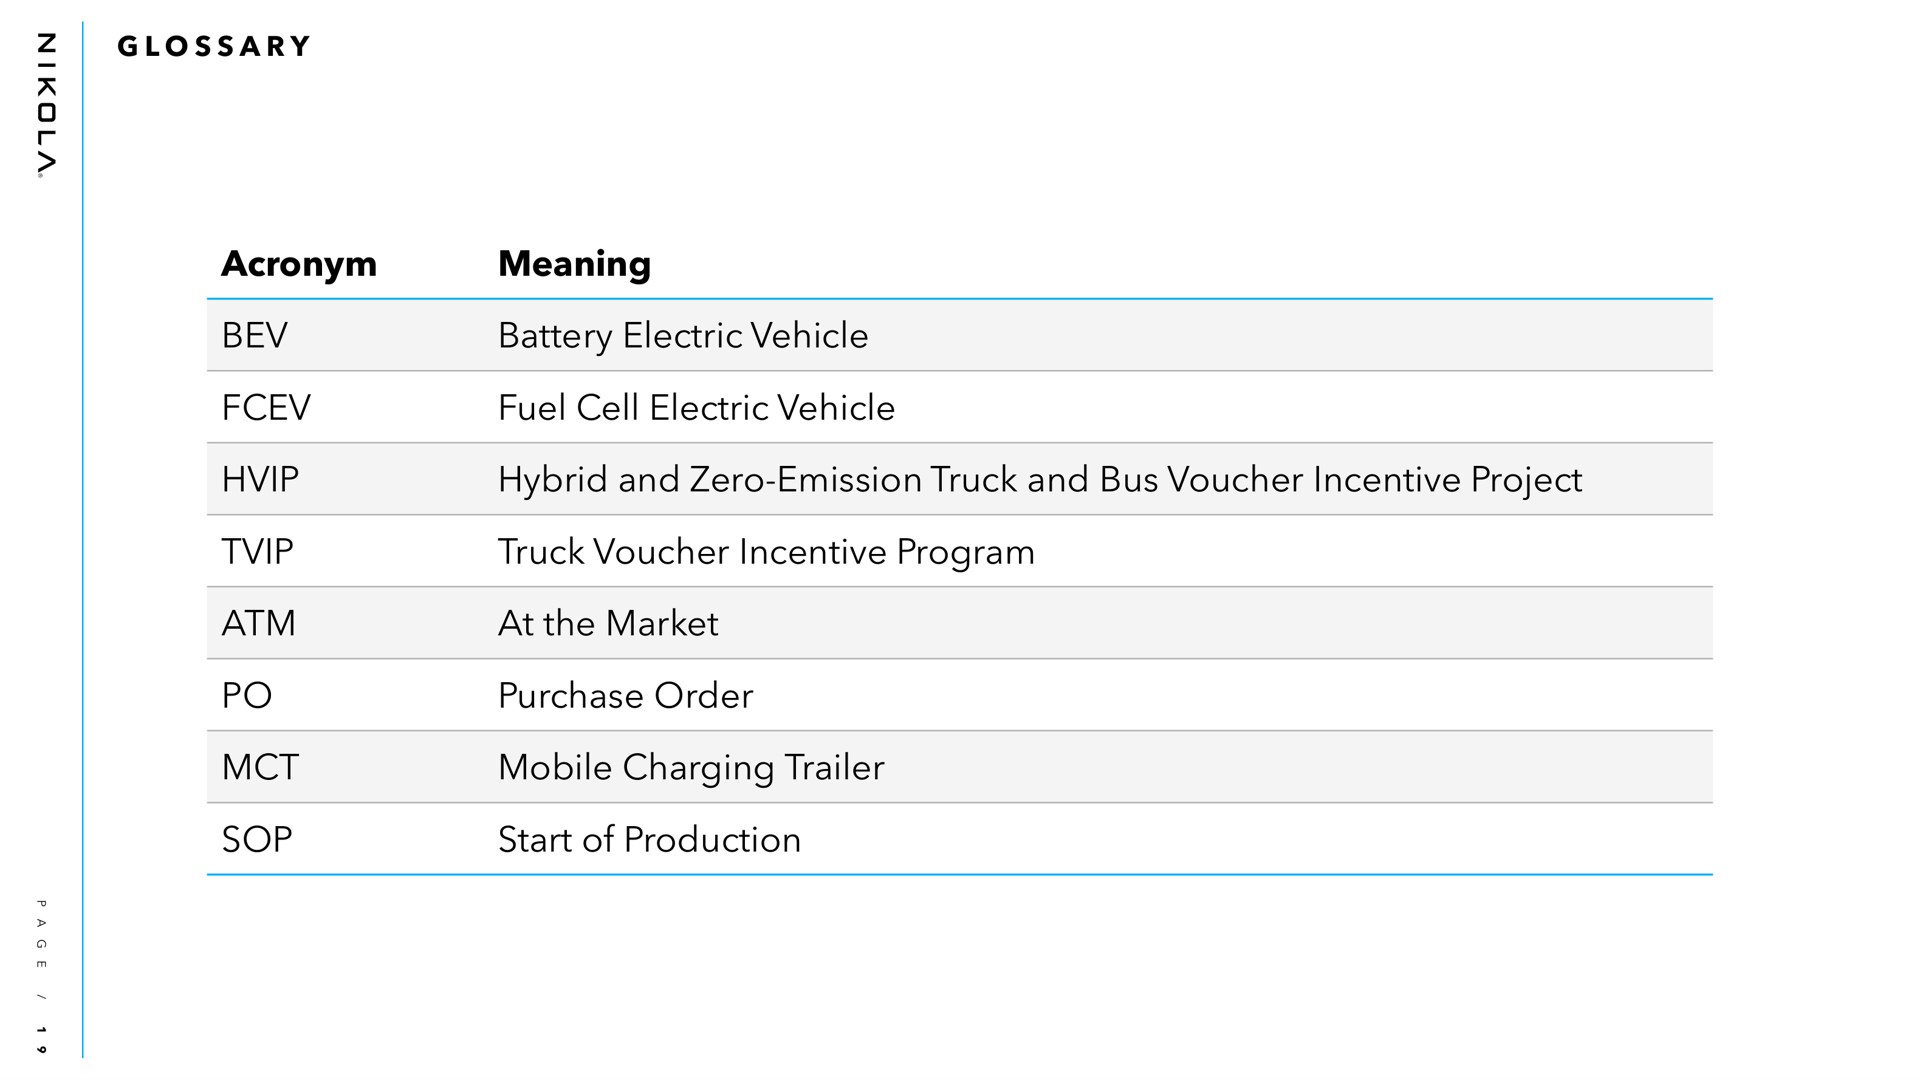 a acronym meaning battery electric vehicle fuel cell electric vehicle hybrid and zero emission truck and bus voucher incentive project truck voucher incentive program at the market purchase order mobile charging trailer start of production sop glossary | Nikola